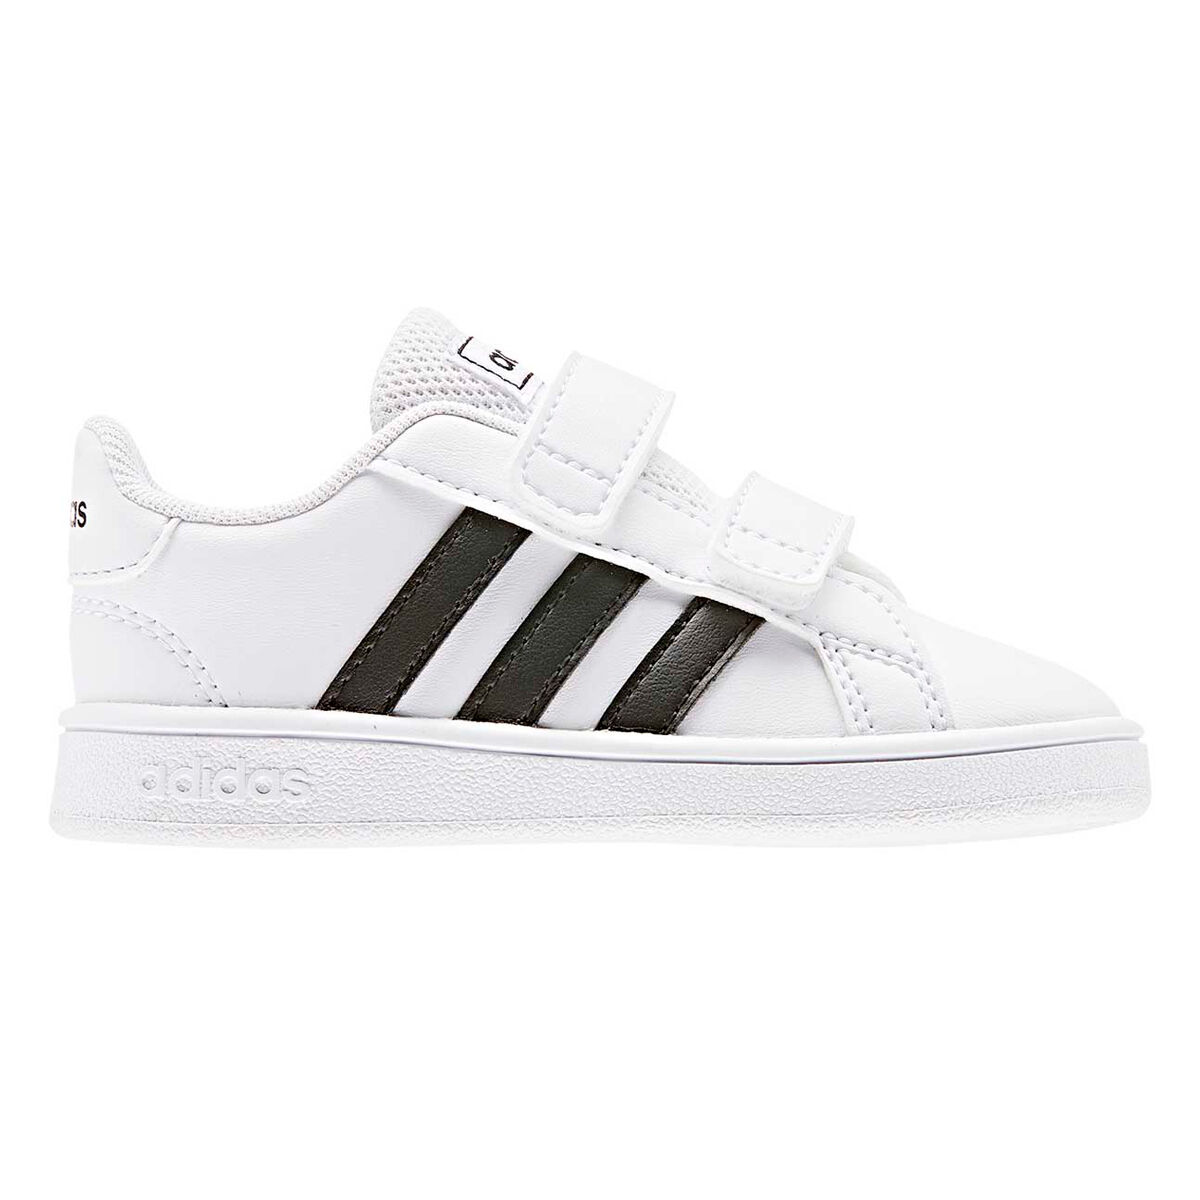 adidas Grand Court Toddlers Shoes White/Black US 7 | Rebel Sport